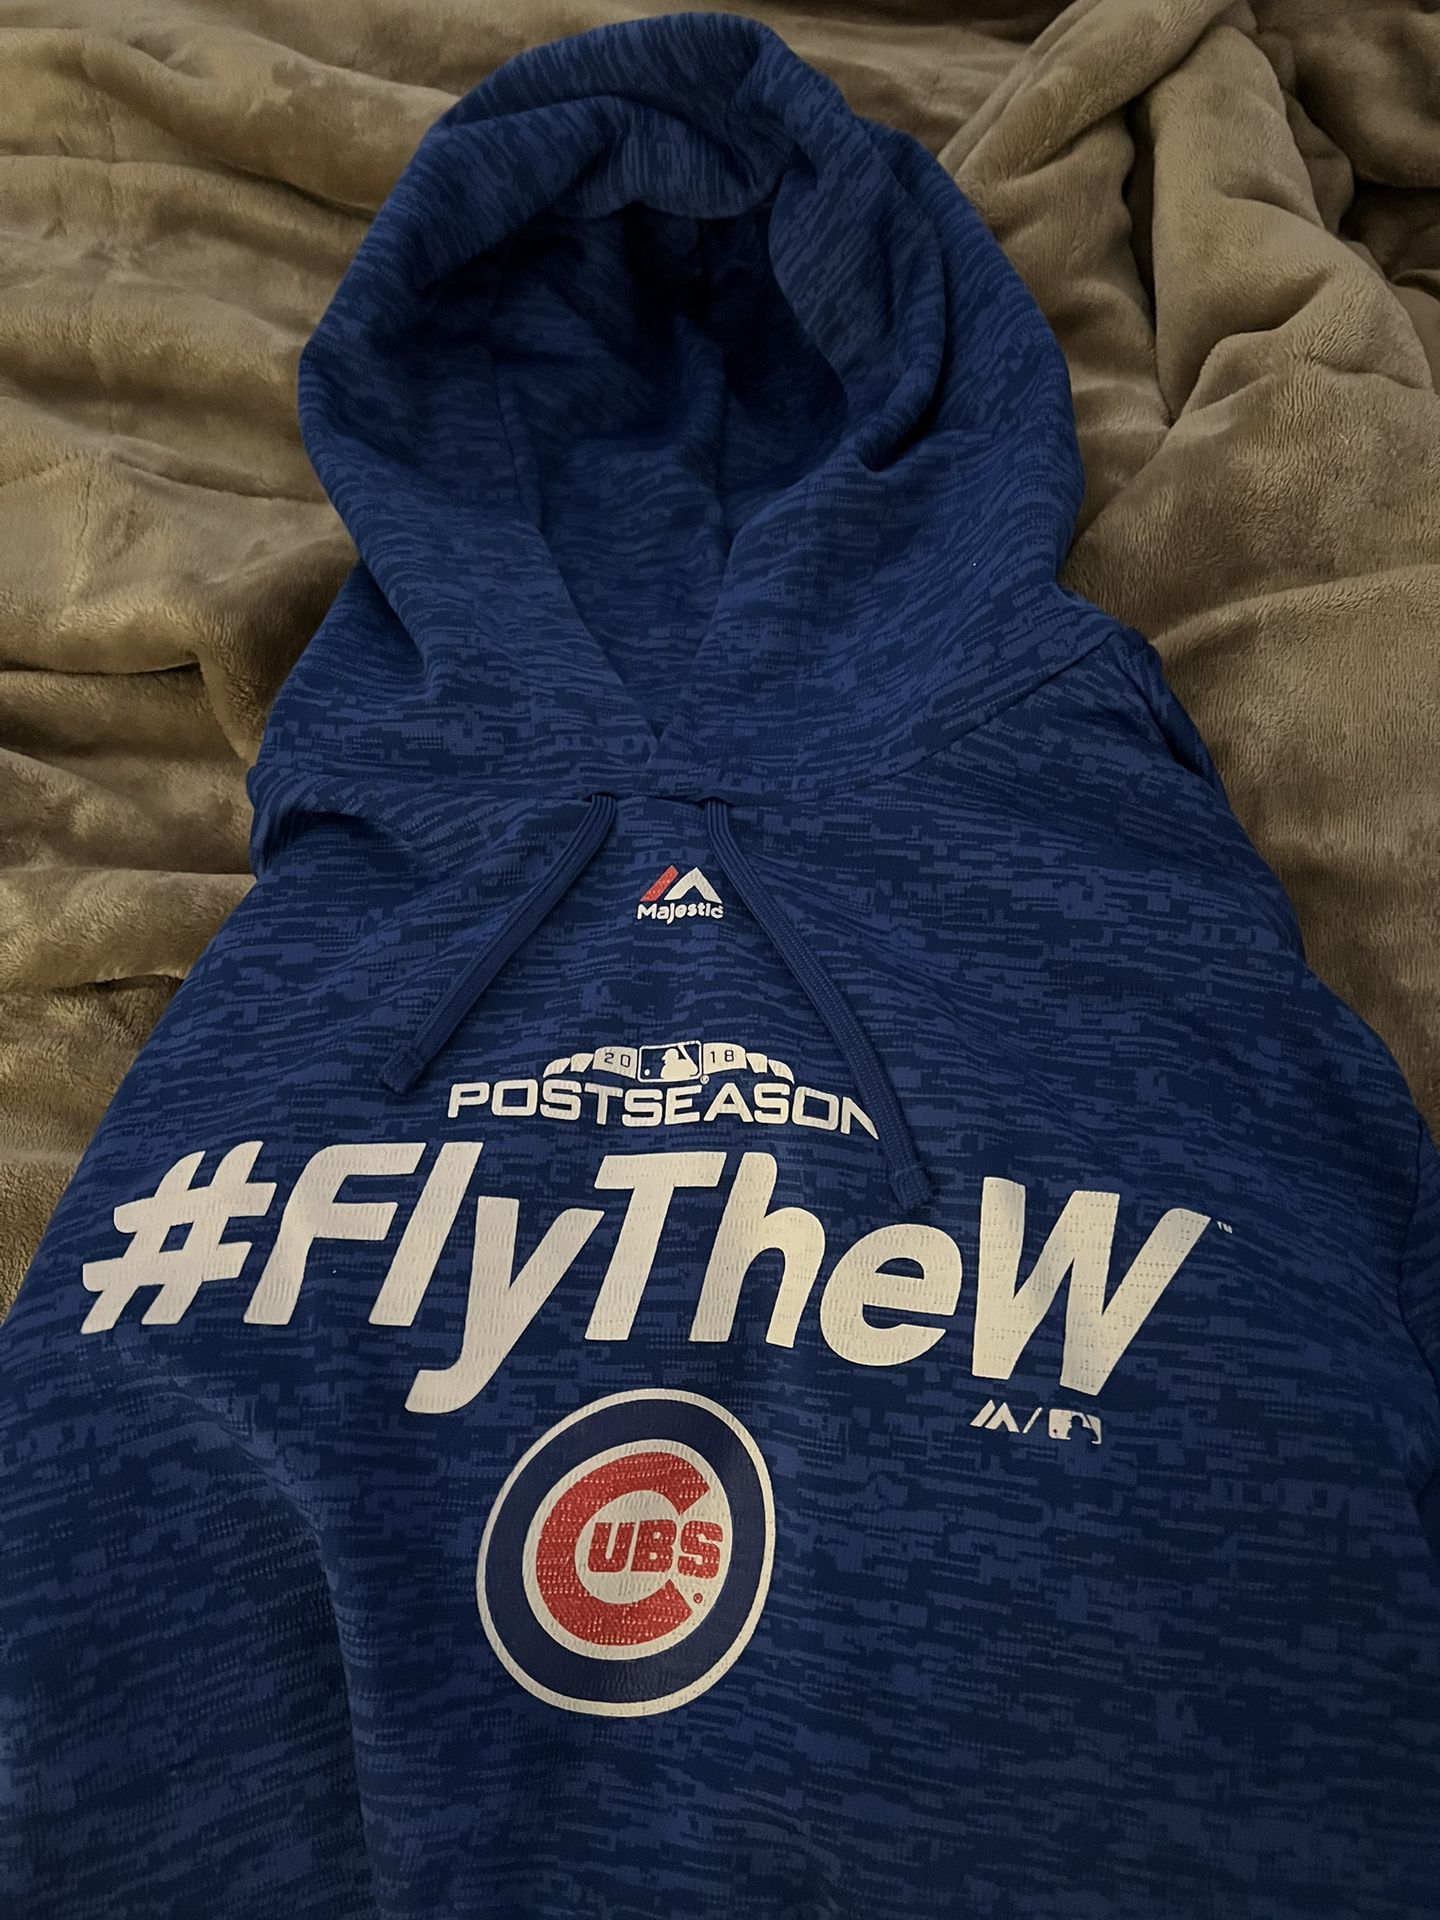 Chicago Cubs Fly The W Sweatshirt for Sale in Crystal Lake, IL